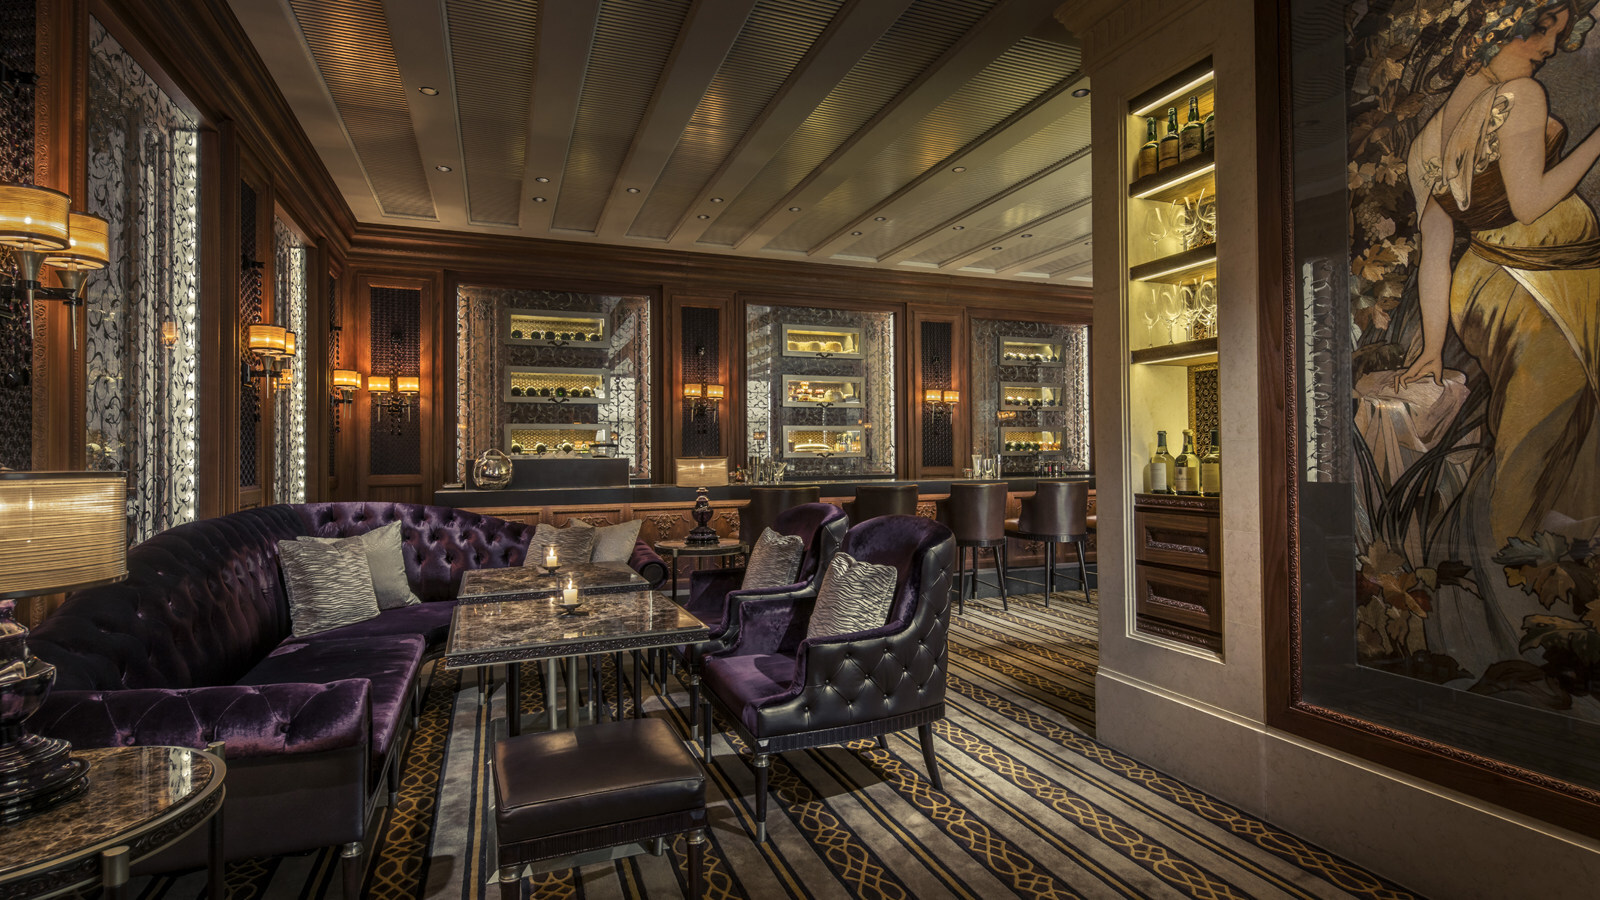 The interior of Caprice Bar at the Four Seasons Hong Kong. Photo: Caprice/Four Seasons Hong Kong